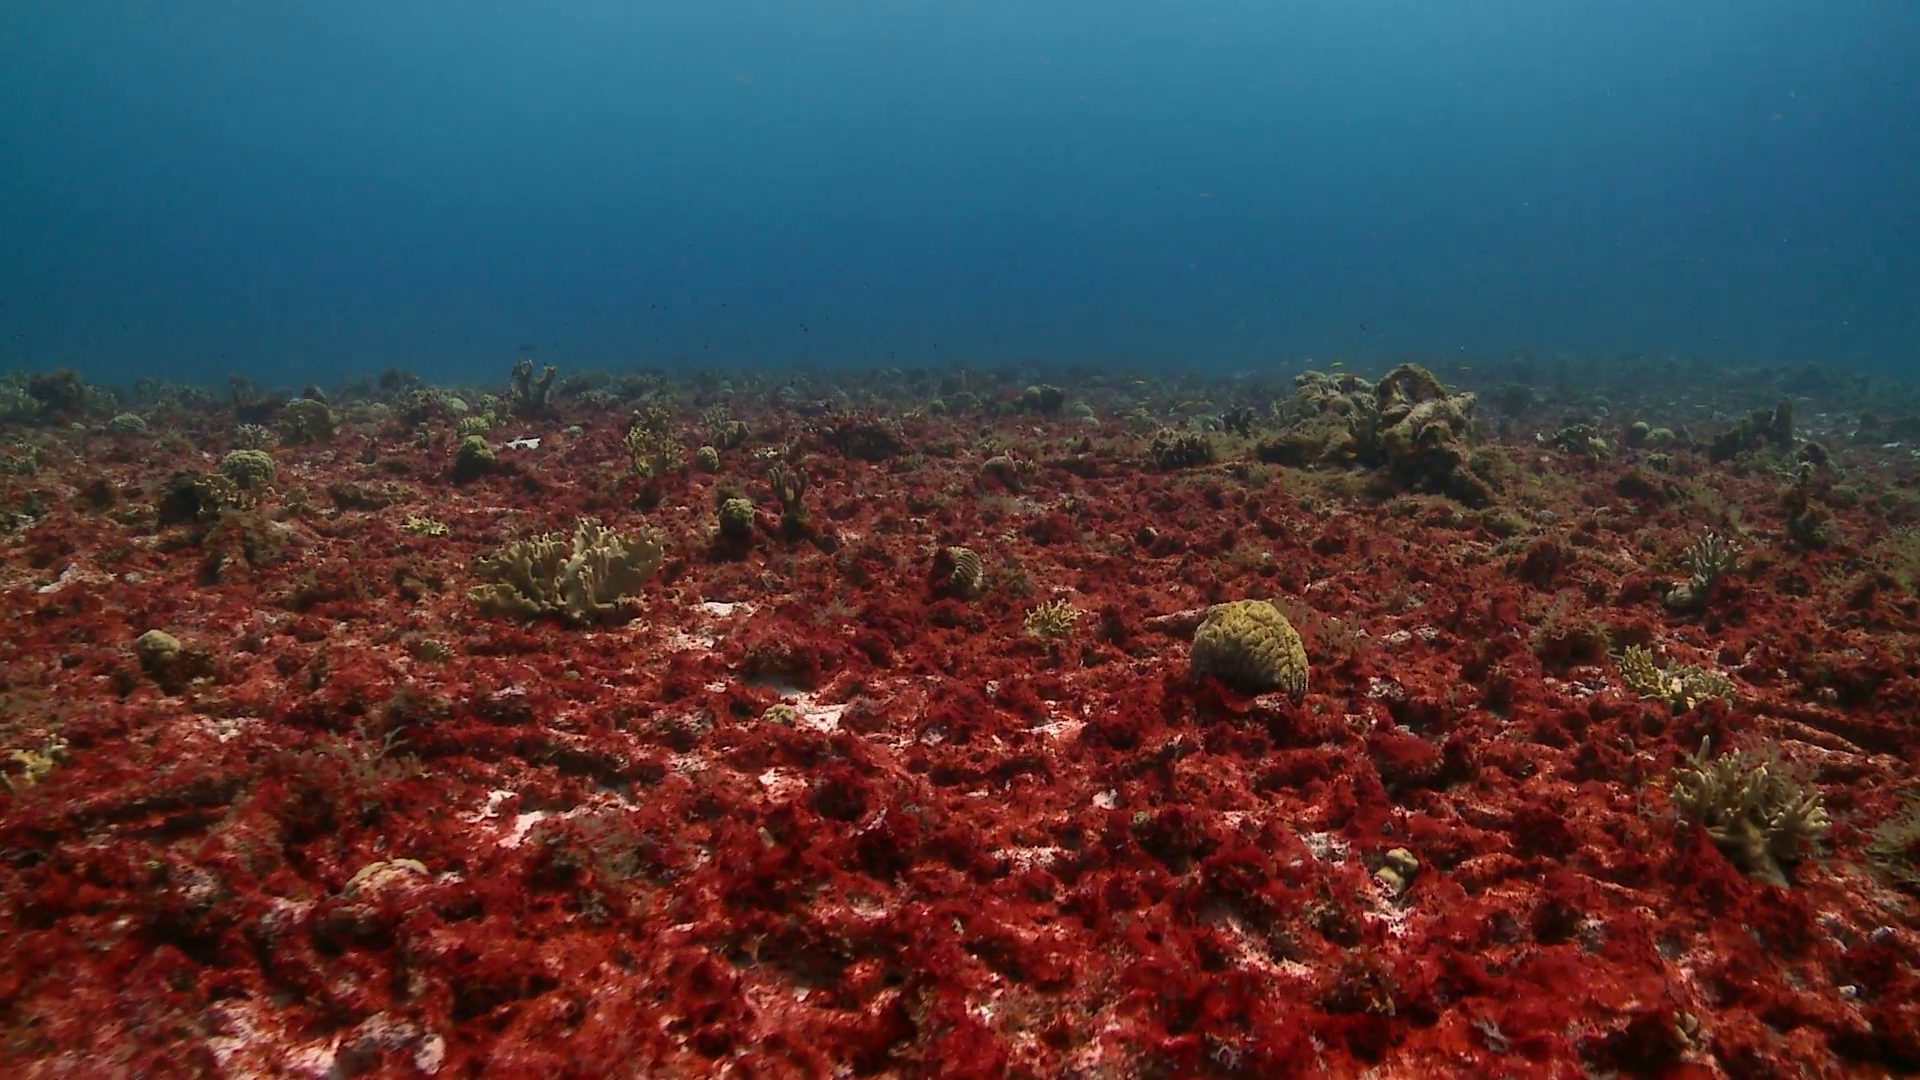 MEXICAN CARIBBEAN: Algae and Sponges Are Choking Off Oxygen To The World's Coral Reefs